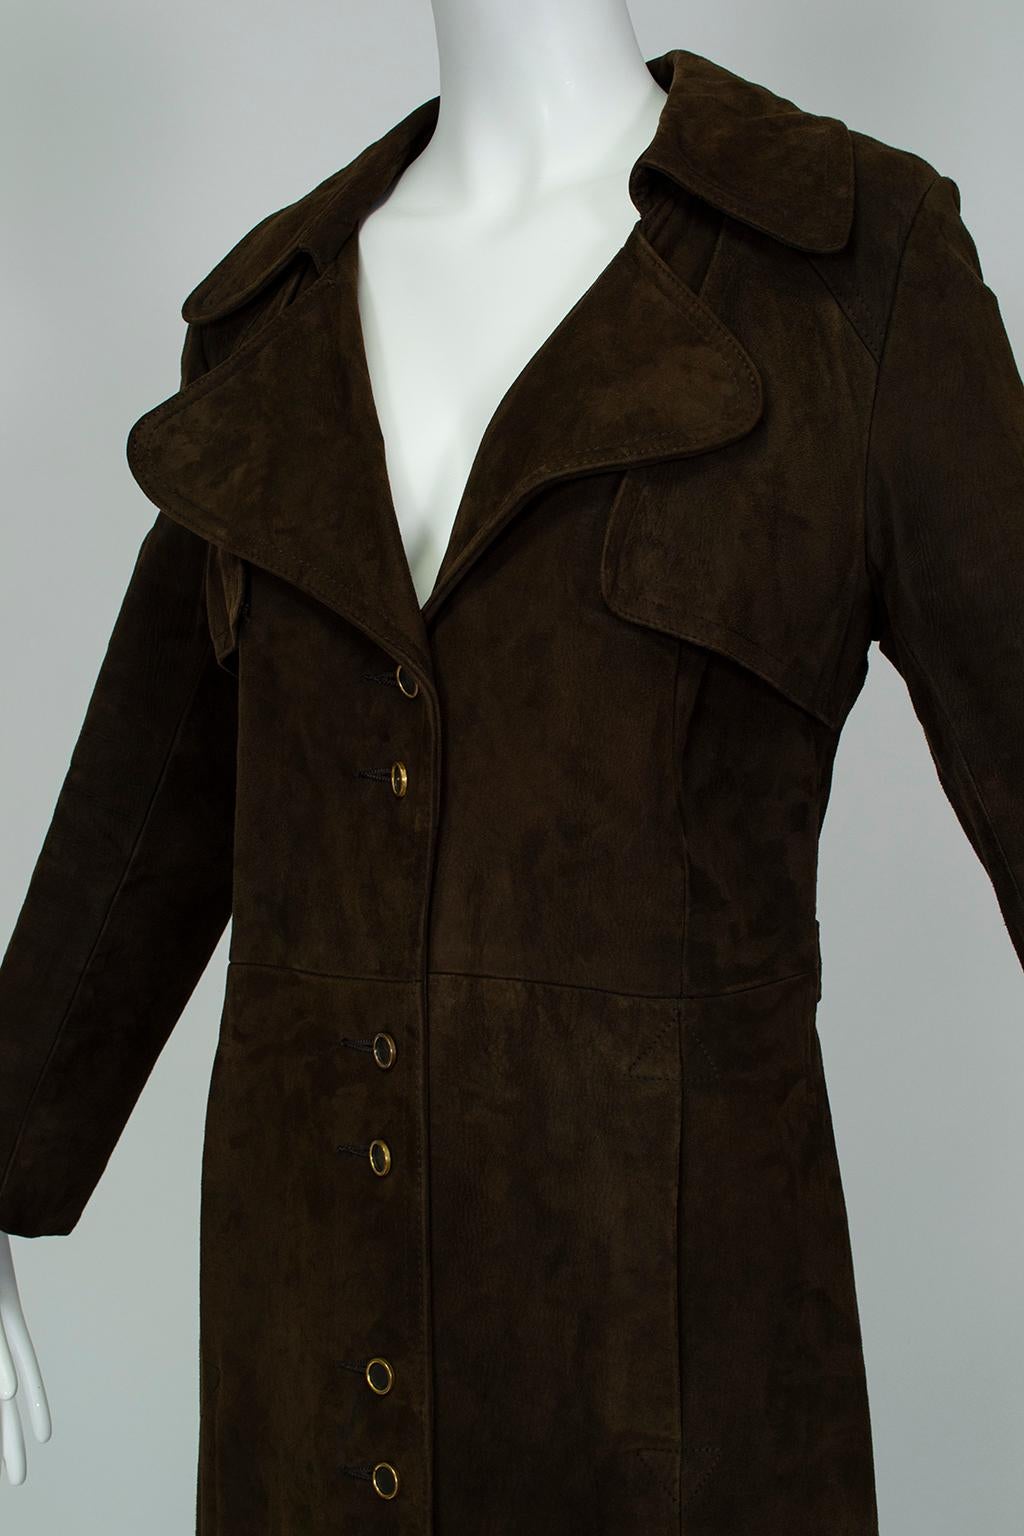 chocolate brown trench coat